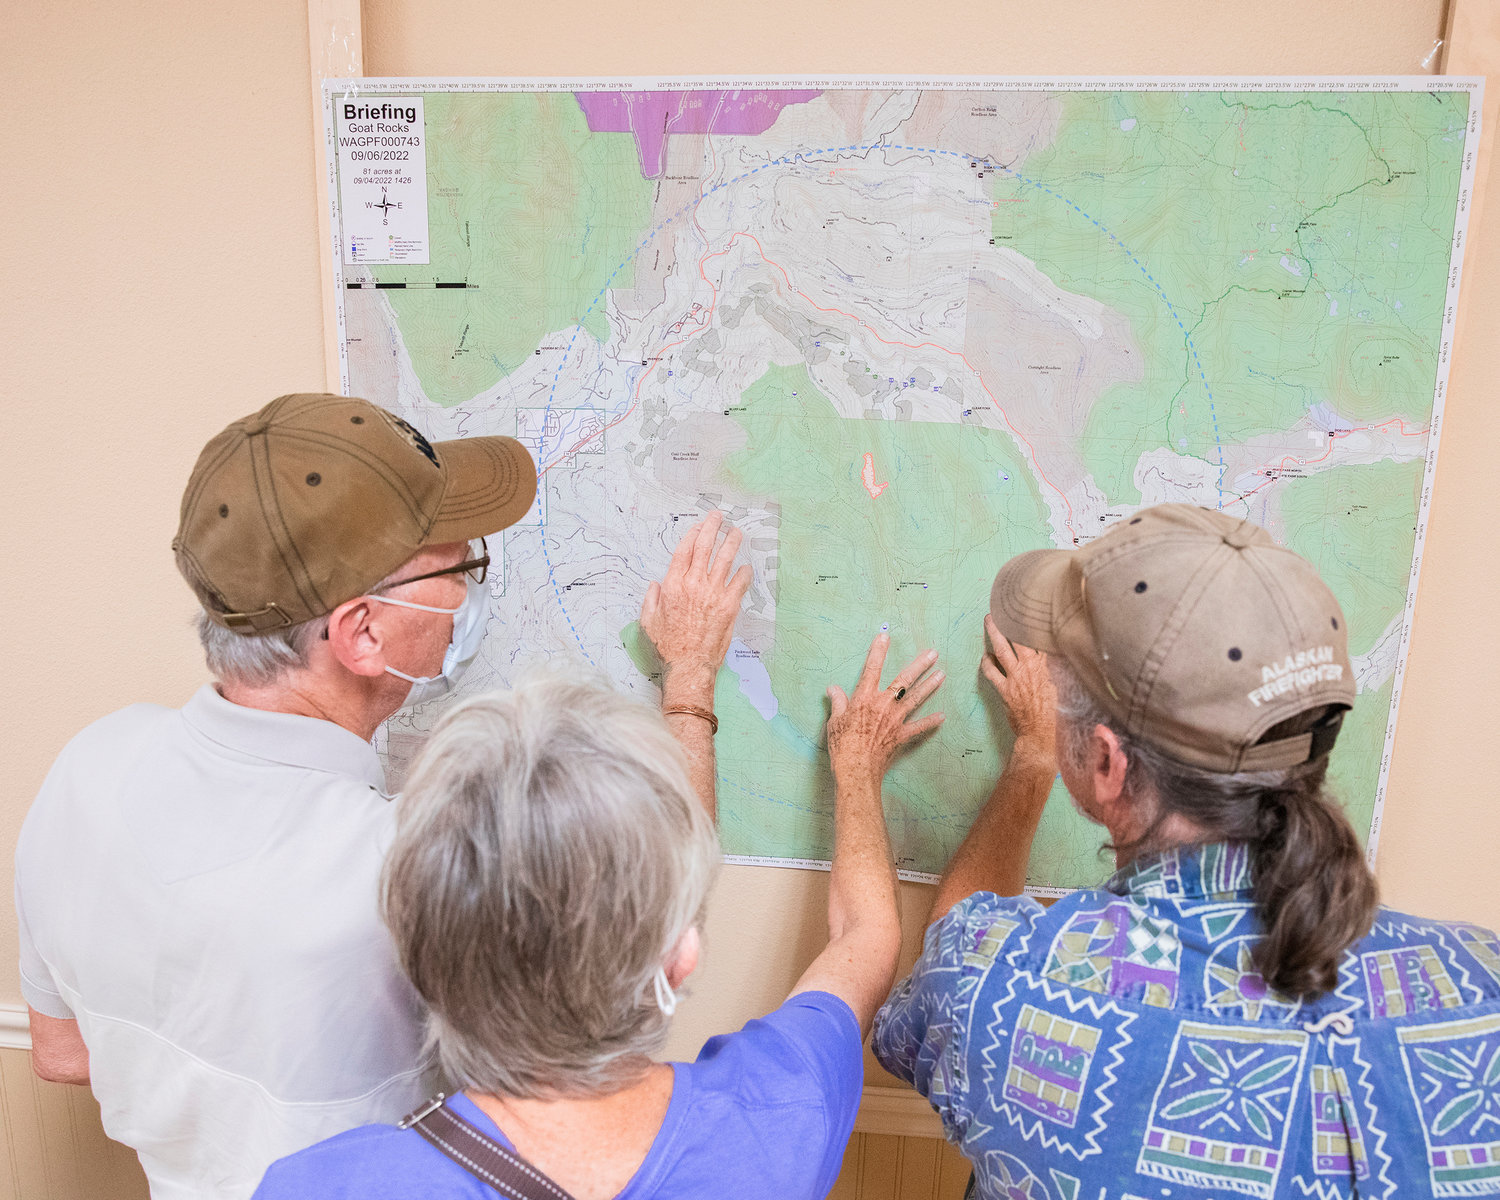 From left, Jim and Patti Correll alongside Greg Arkel, all of Packwood, crowd around a map displaying the Goat Rocks Fire on Tuesday.